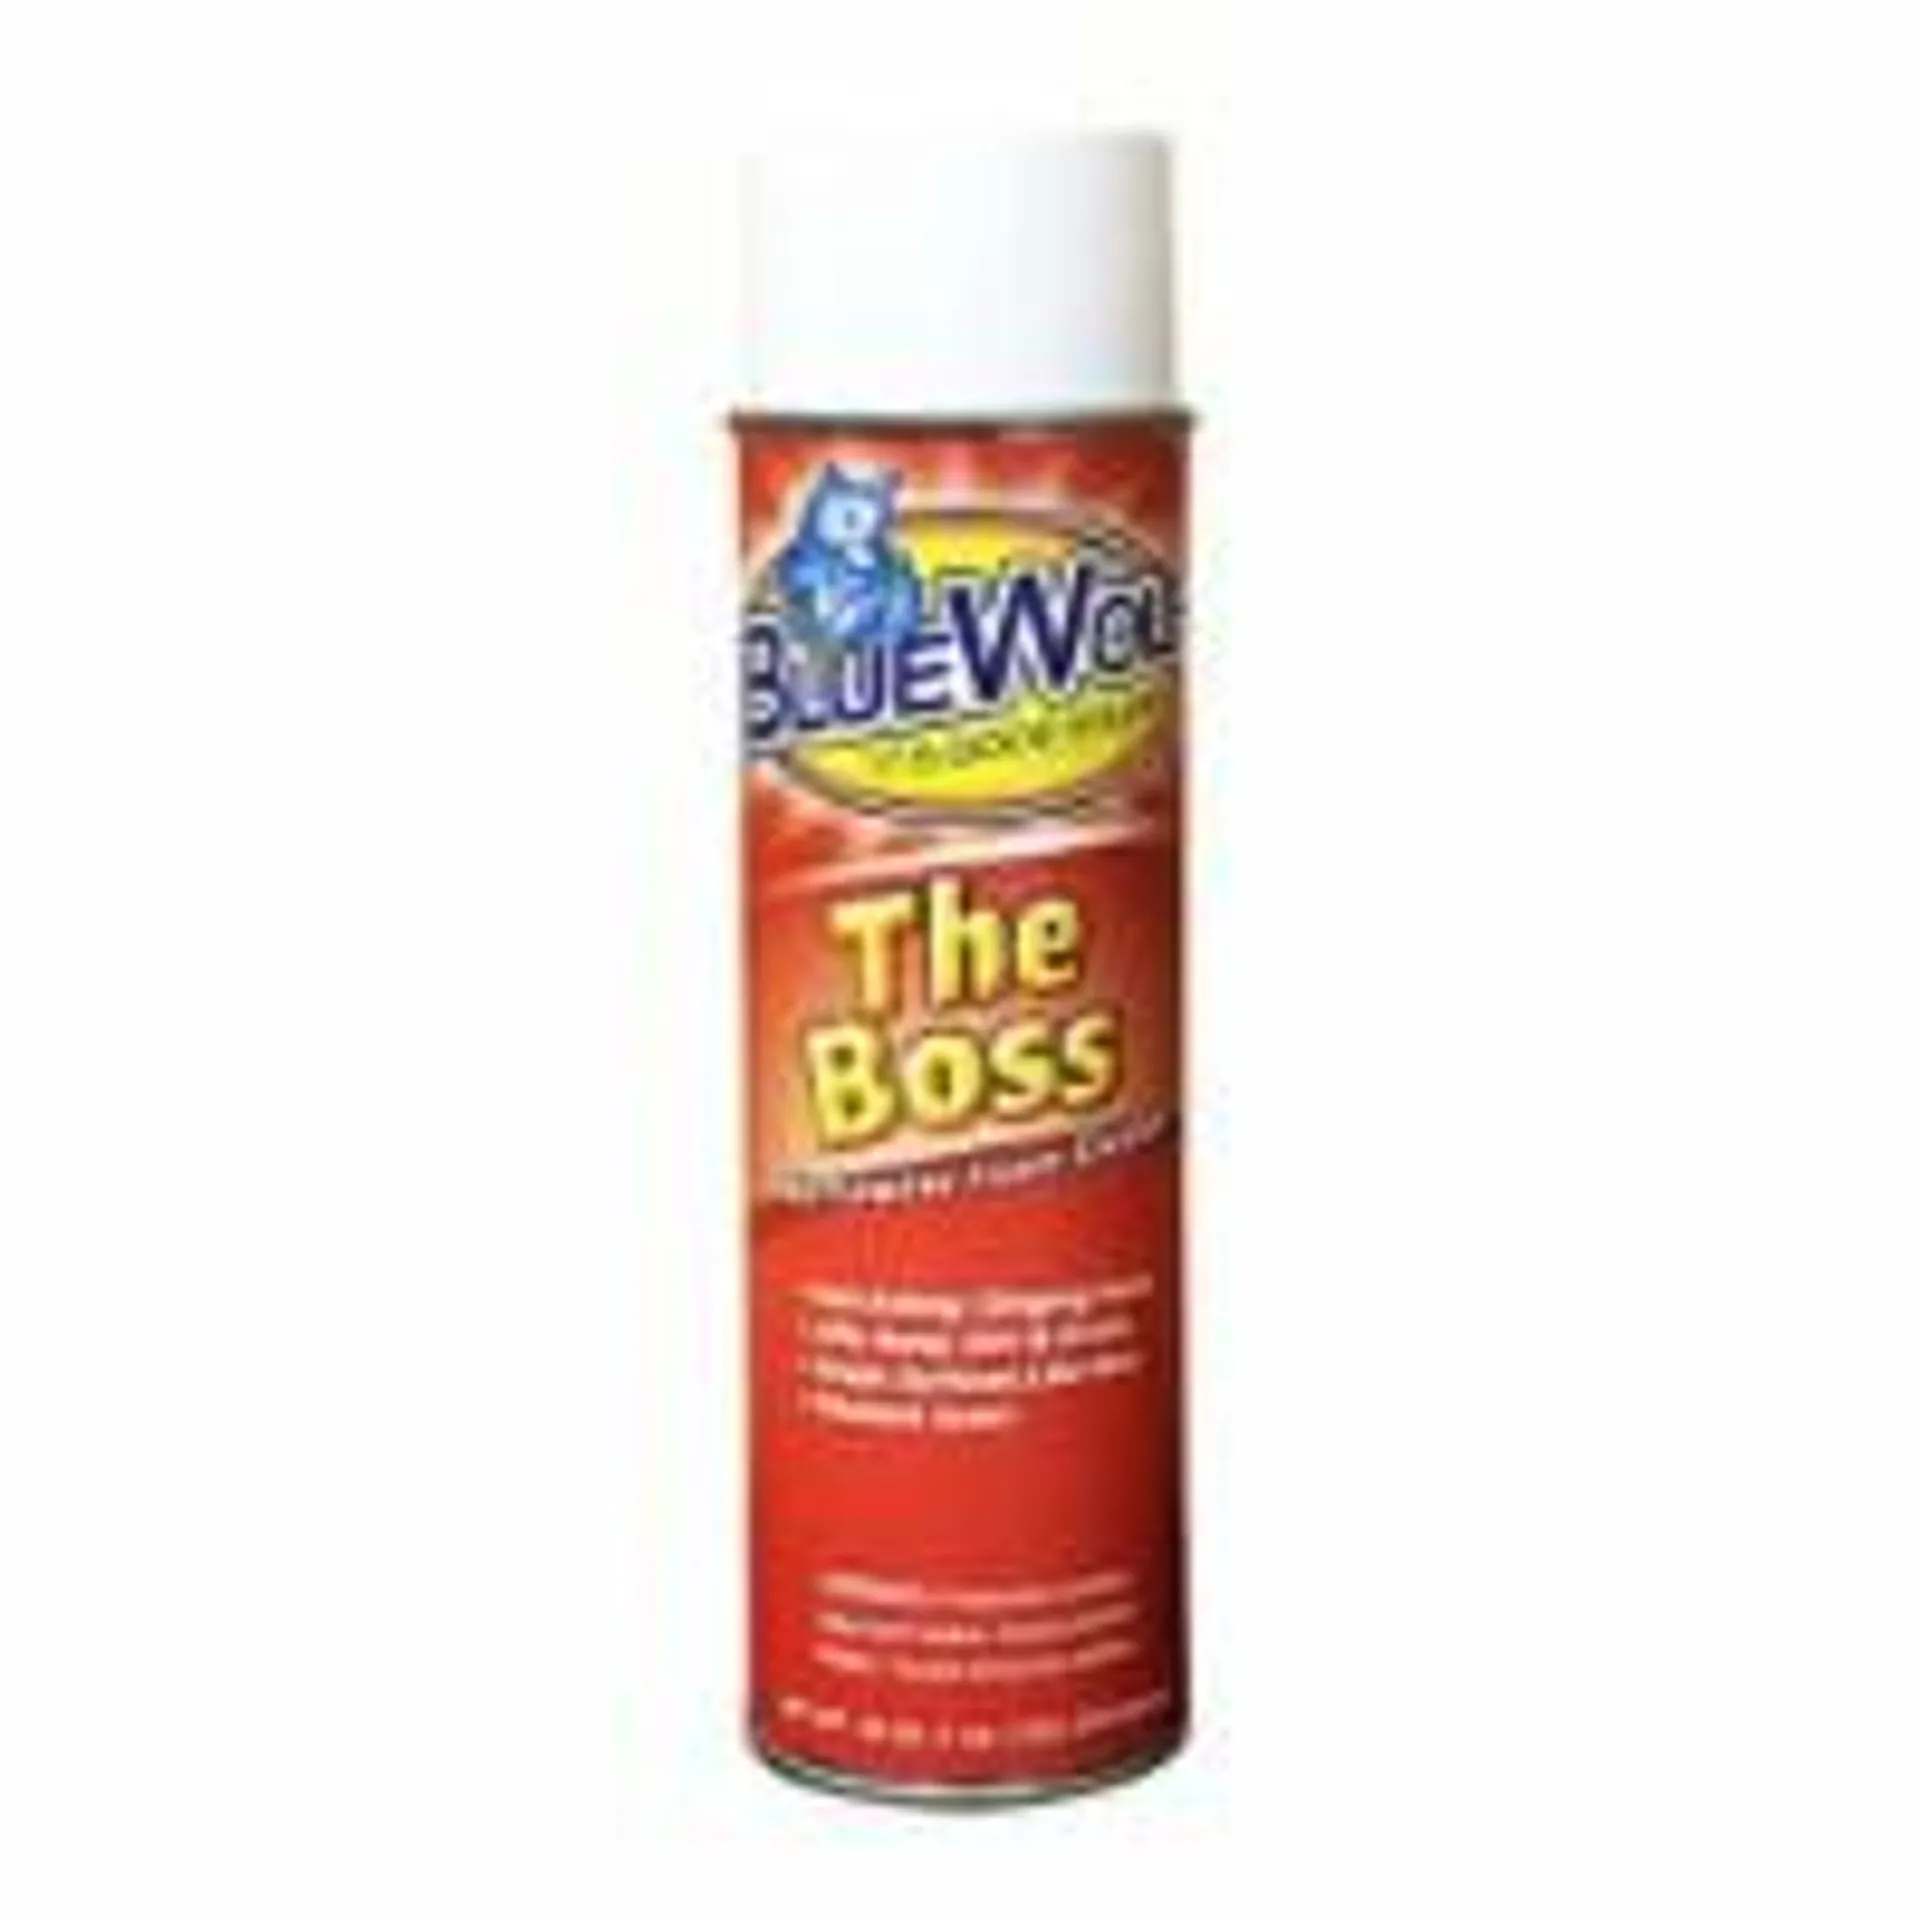 Blue Wolf Sales & Service PBW-TB Boss General Purpose Cleaner